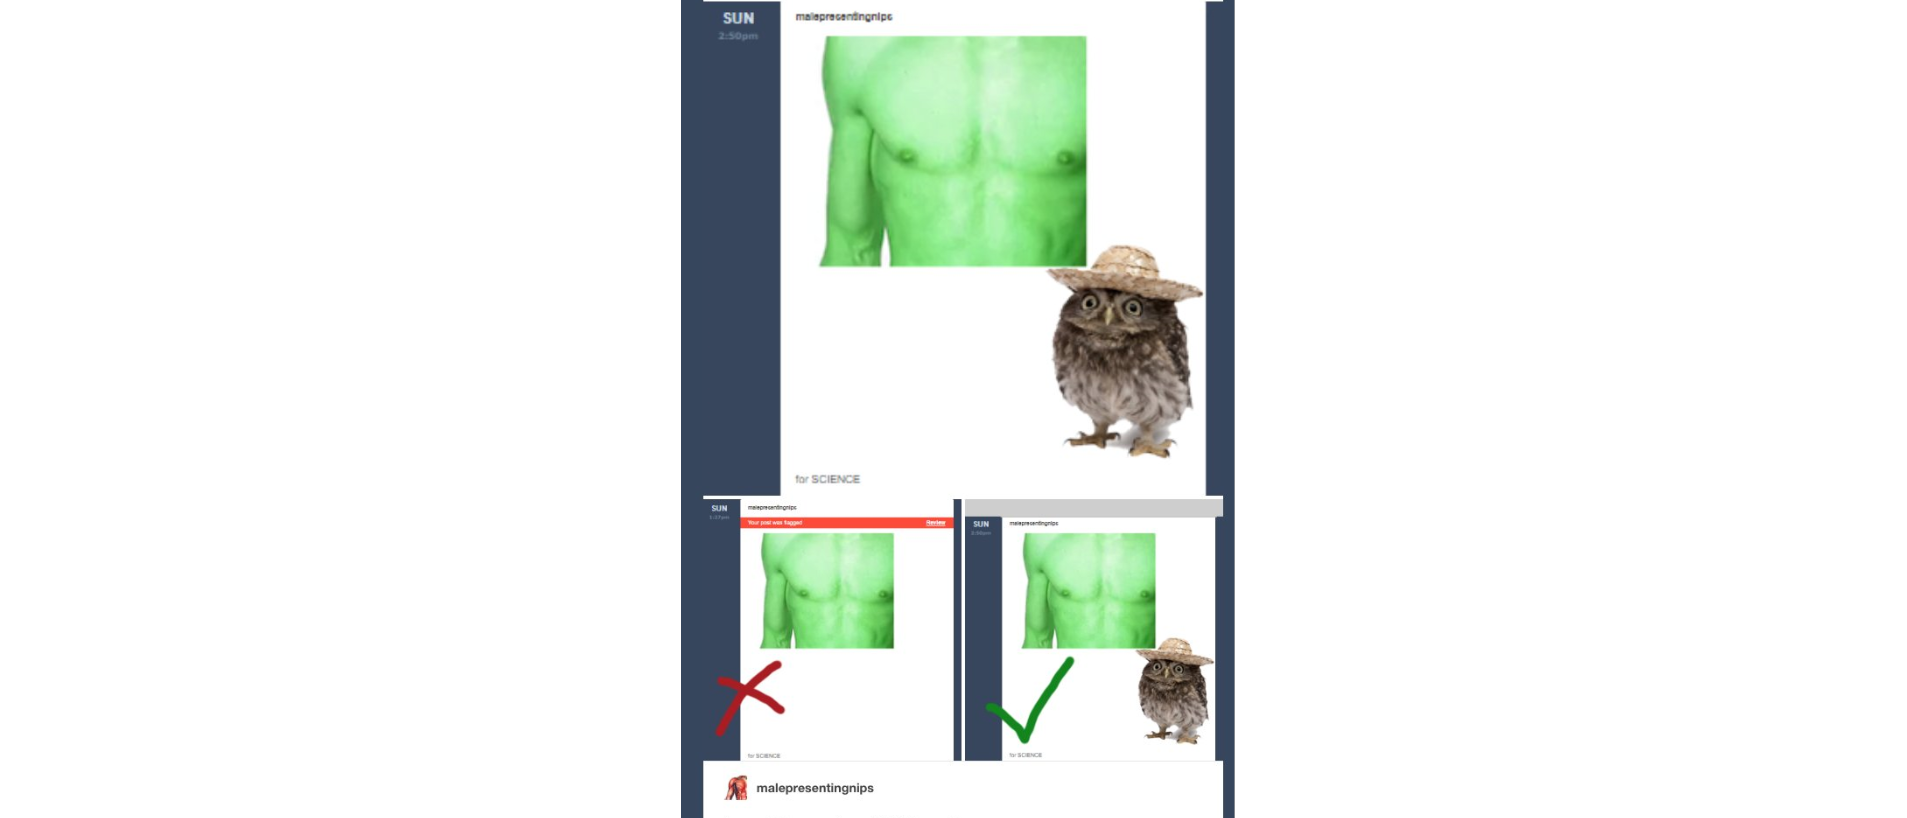 Owl pics? Here's how Tumblr censor bots are being fooled